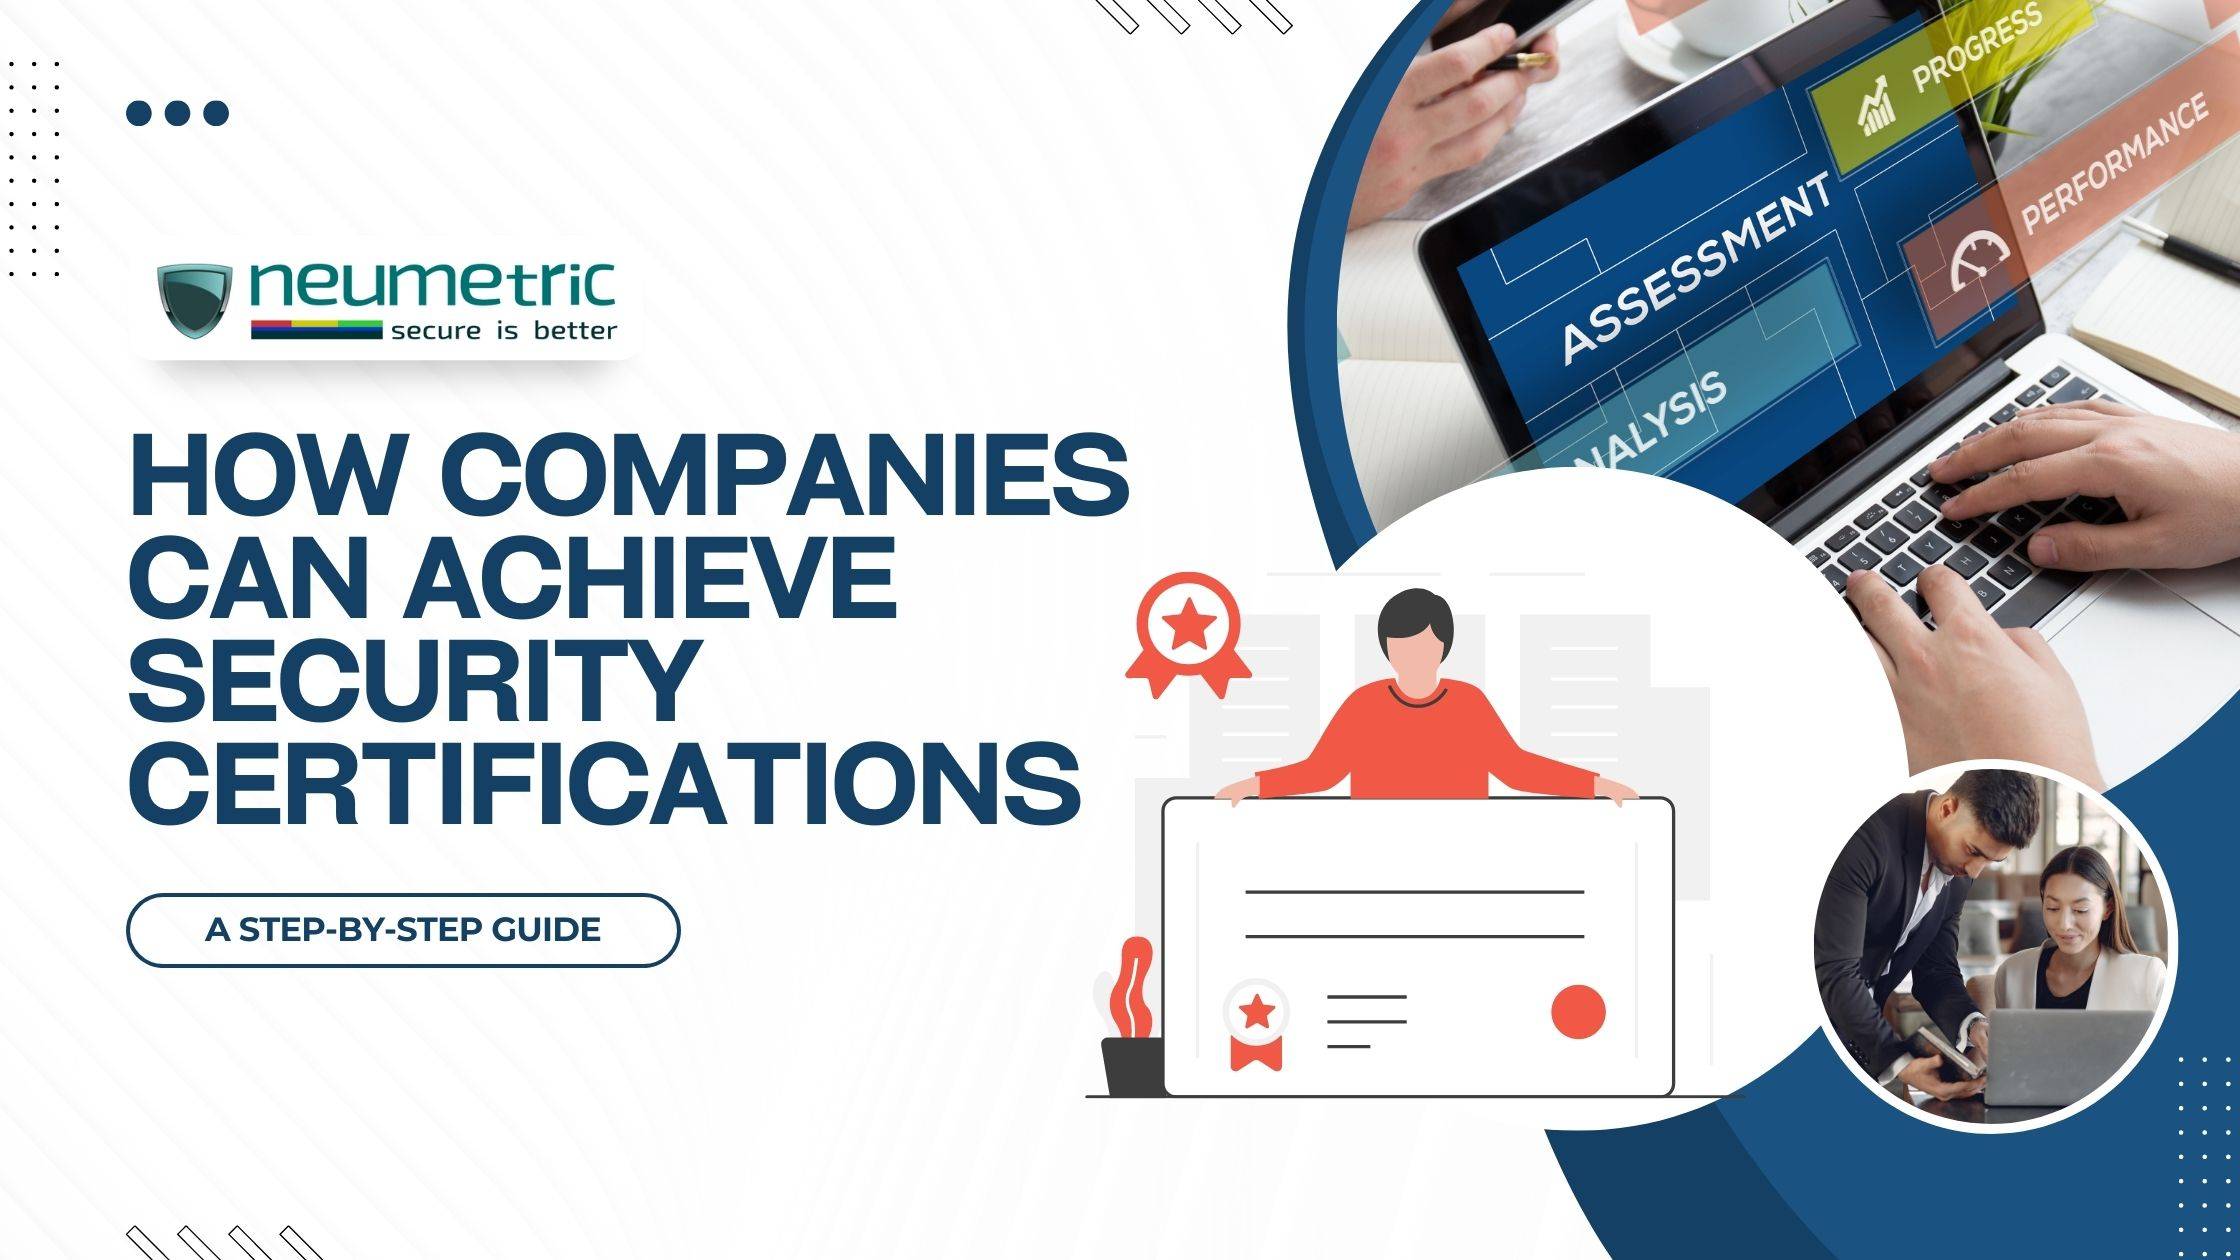 How should Companies achieve Security Certifications?